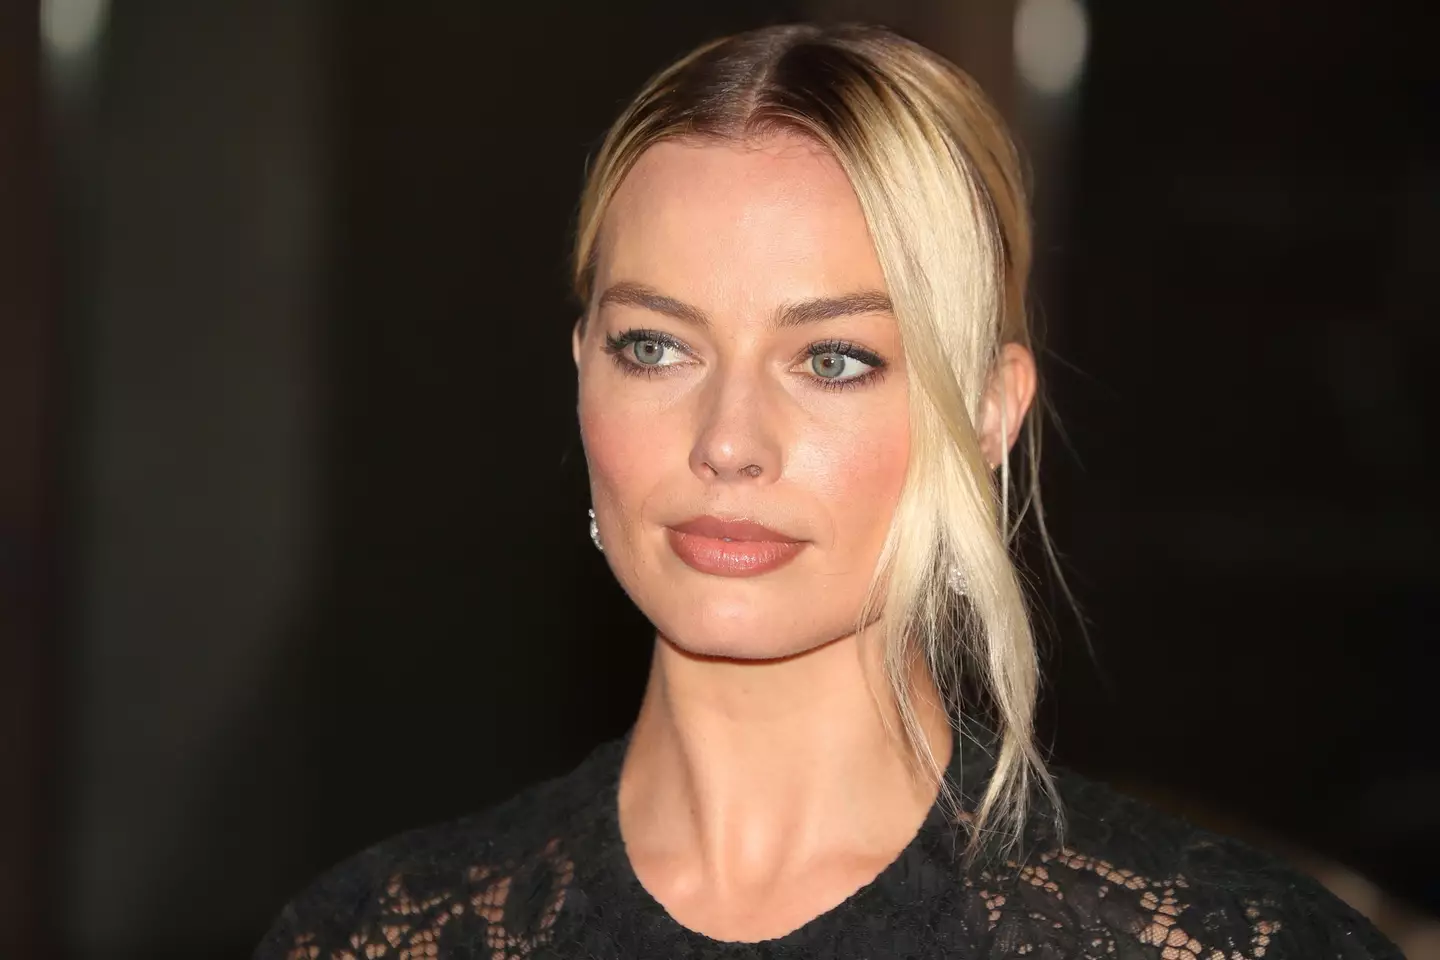 Margot Robbie said she was 'mortified' after being papped.